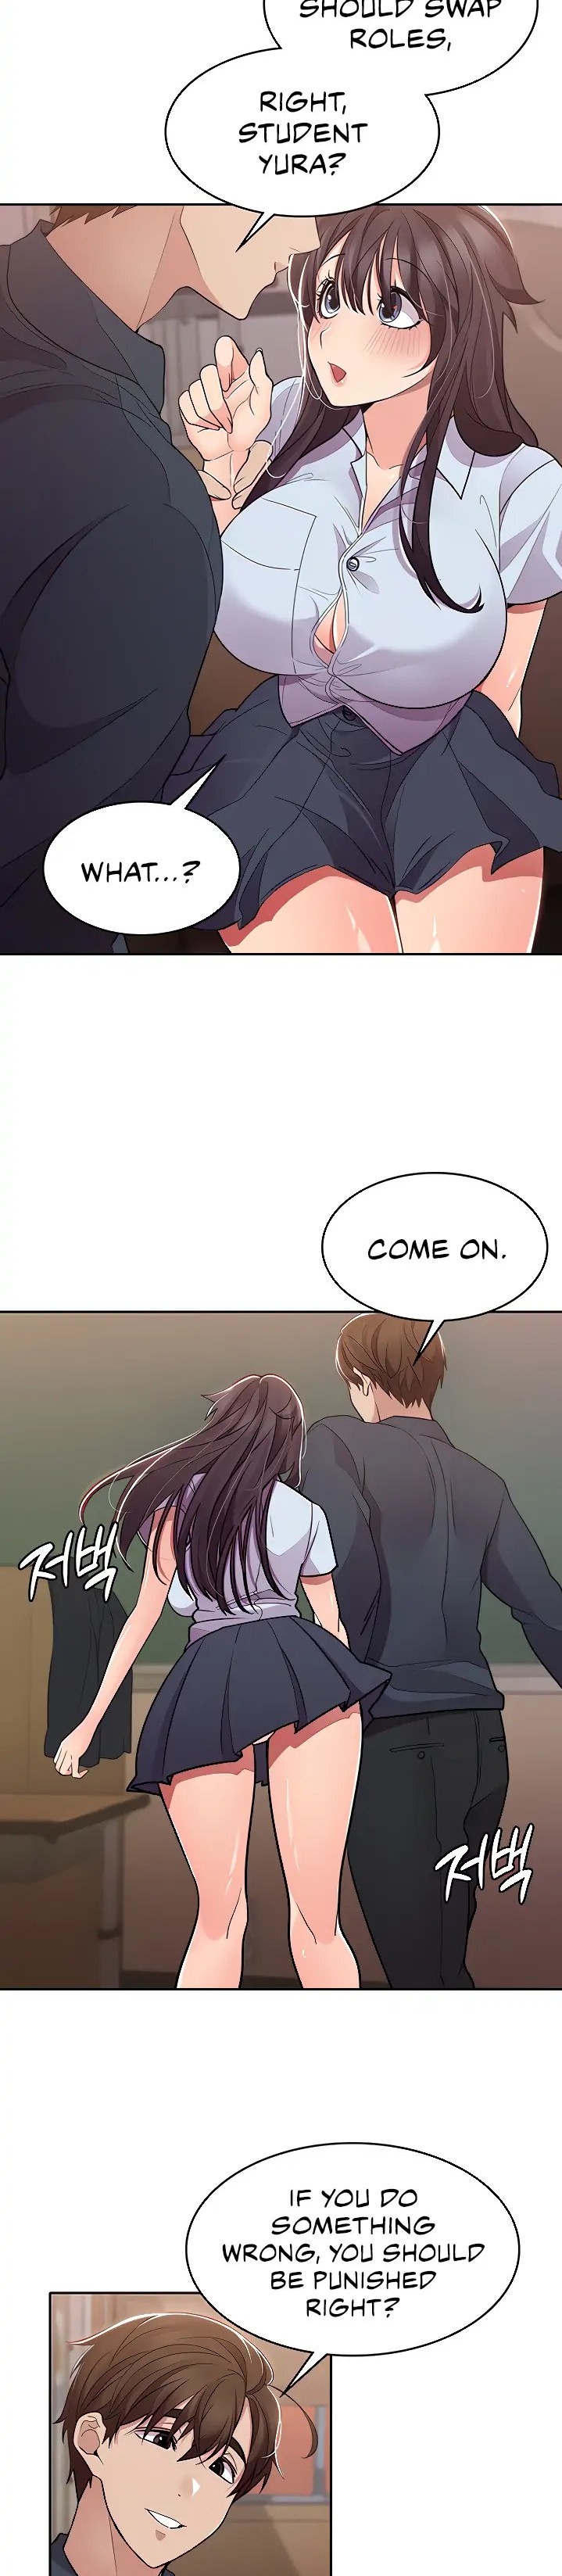 Meeting you again - Chapter 18 Page 17